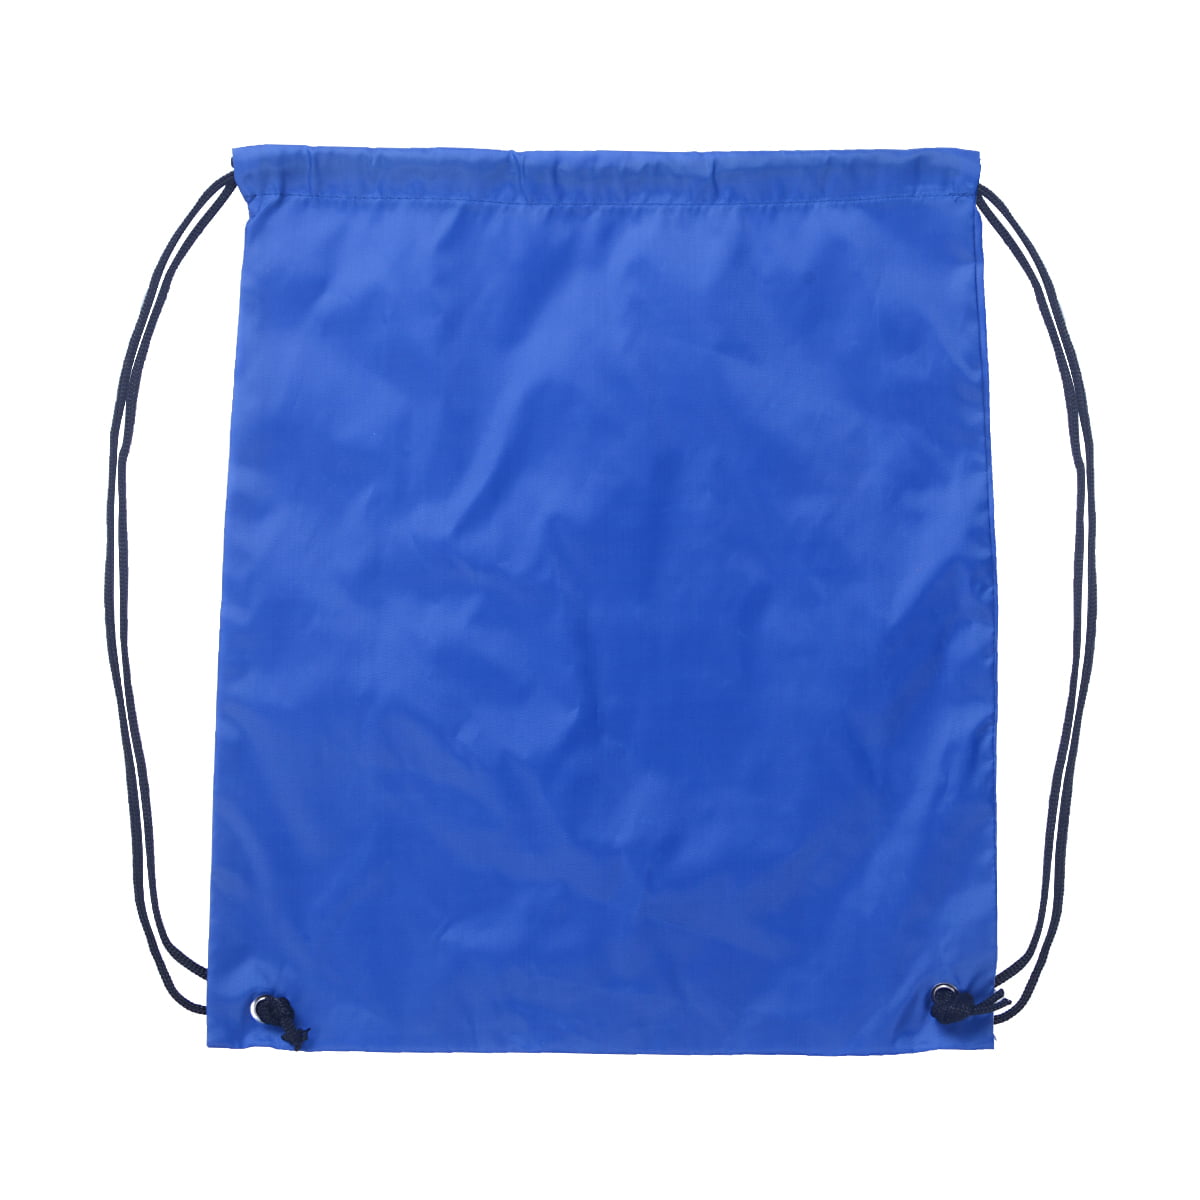 Unisex Sports Waterproof Drawstring Bags String Bag Solid Color ...